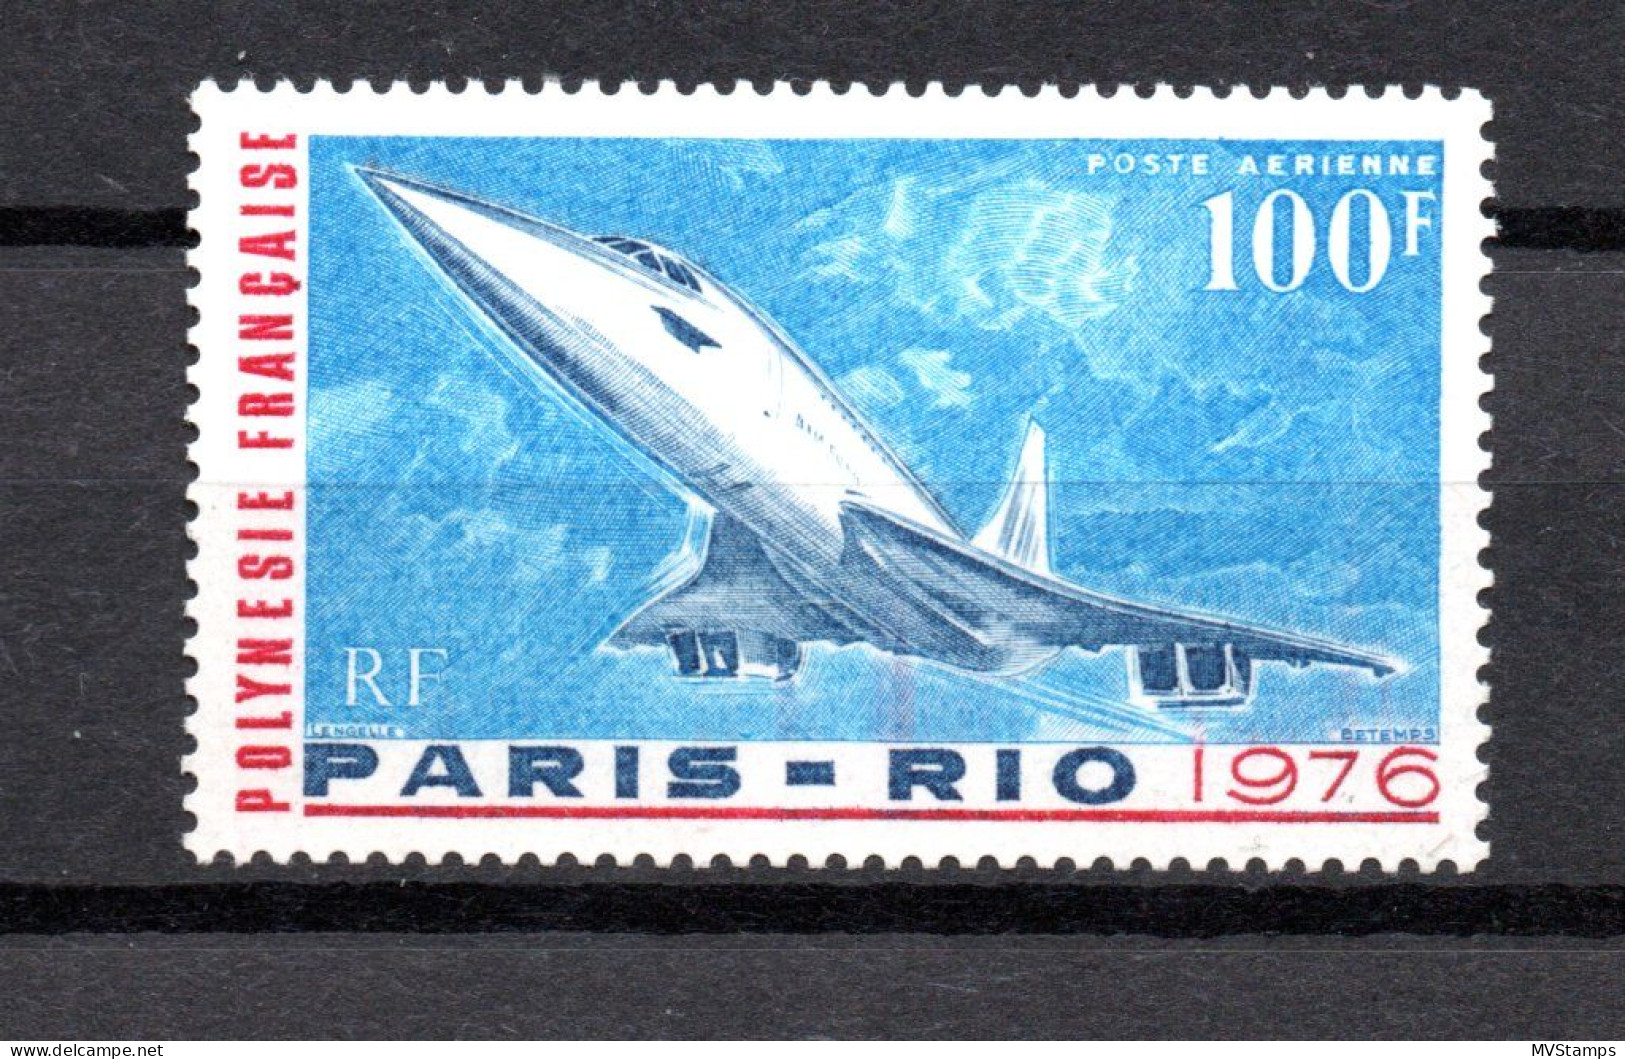 Polynesia (France ) 1976 Concorde/Aviation/airmail Stamp (Michel 208) MNH - Nuevos